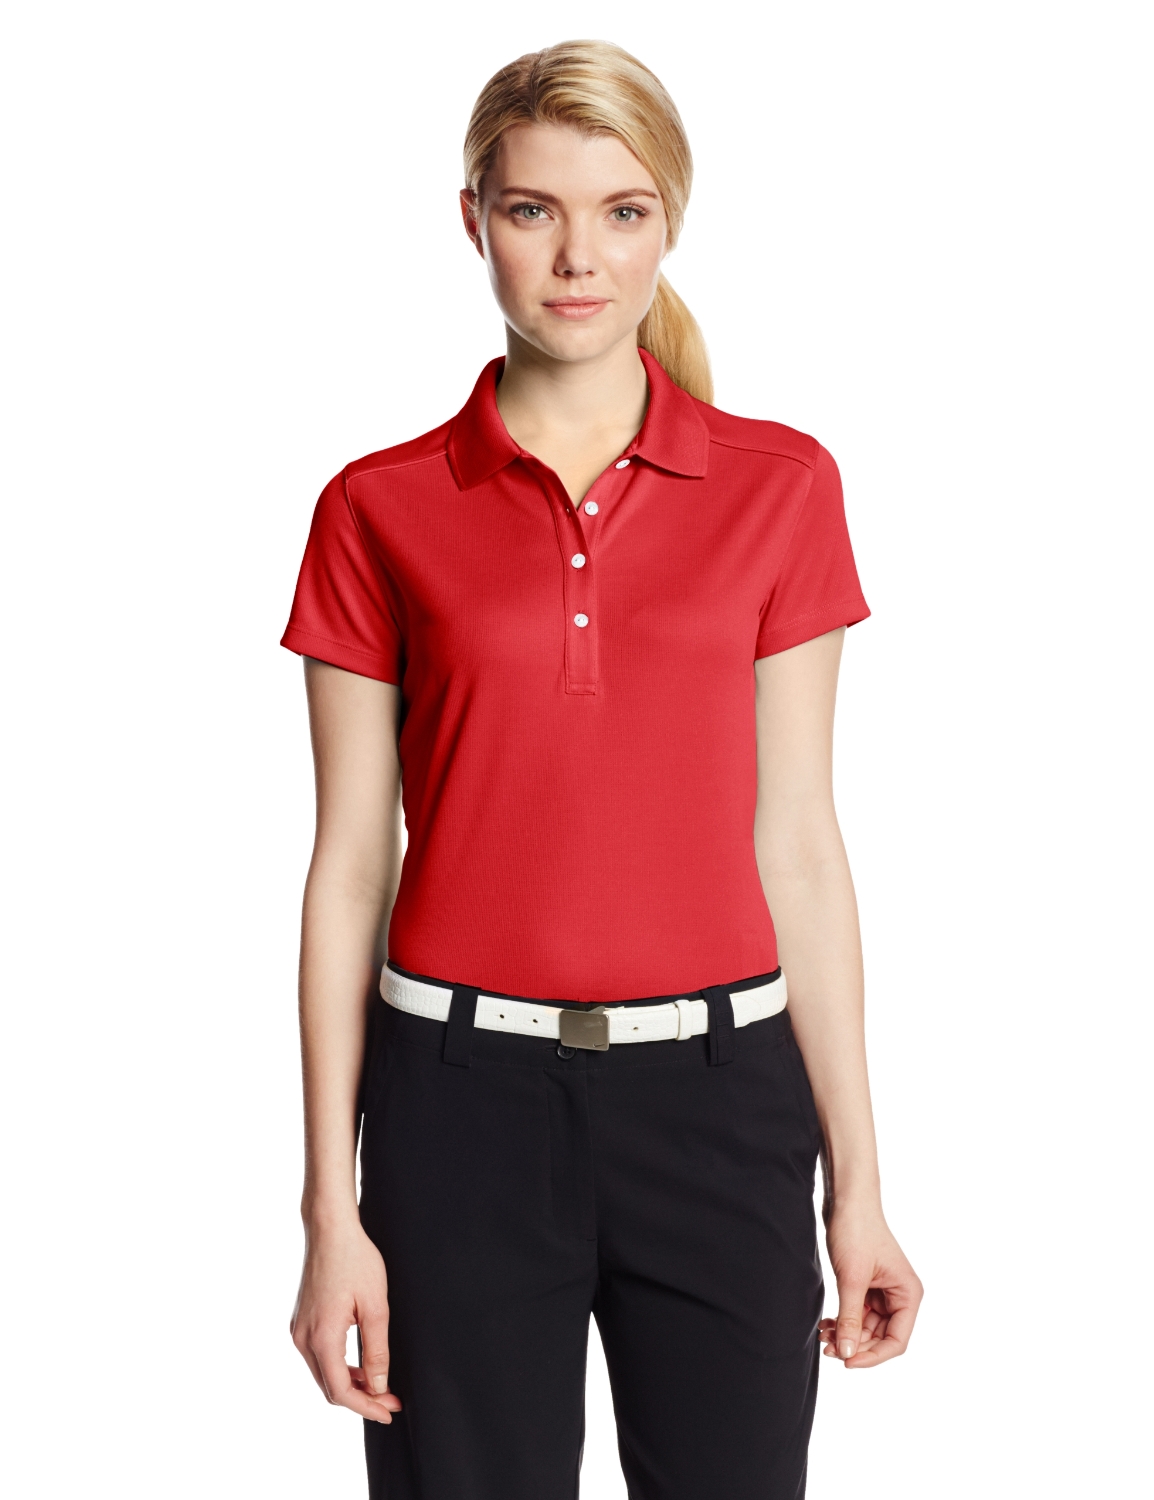 Callaway Womens Solid Double Knit Short Sleeve Golf Shirts